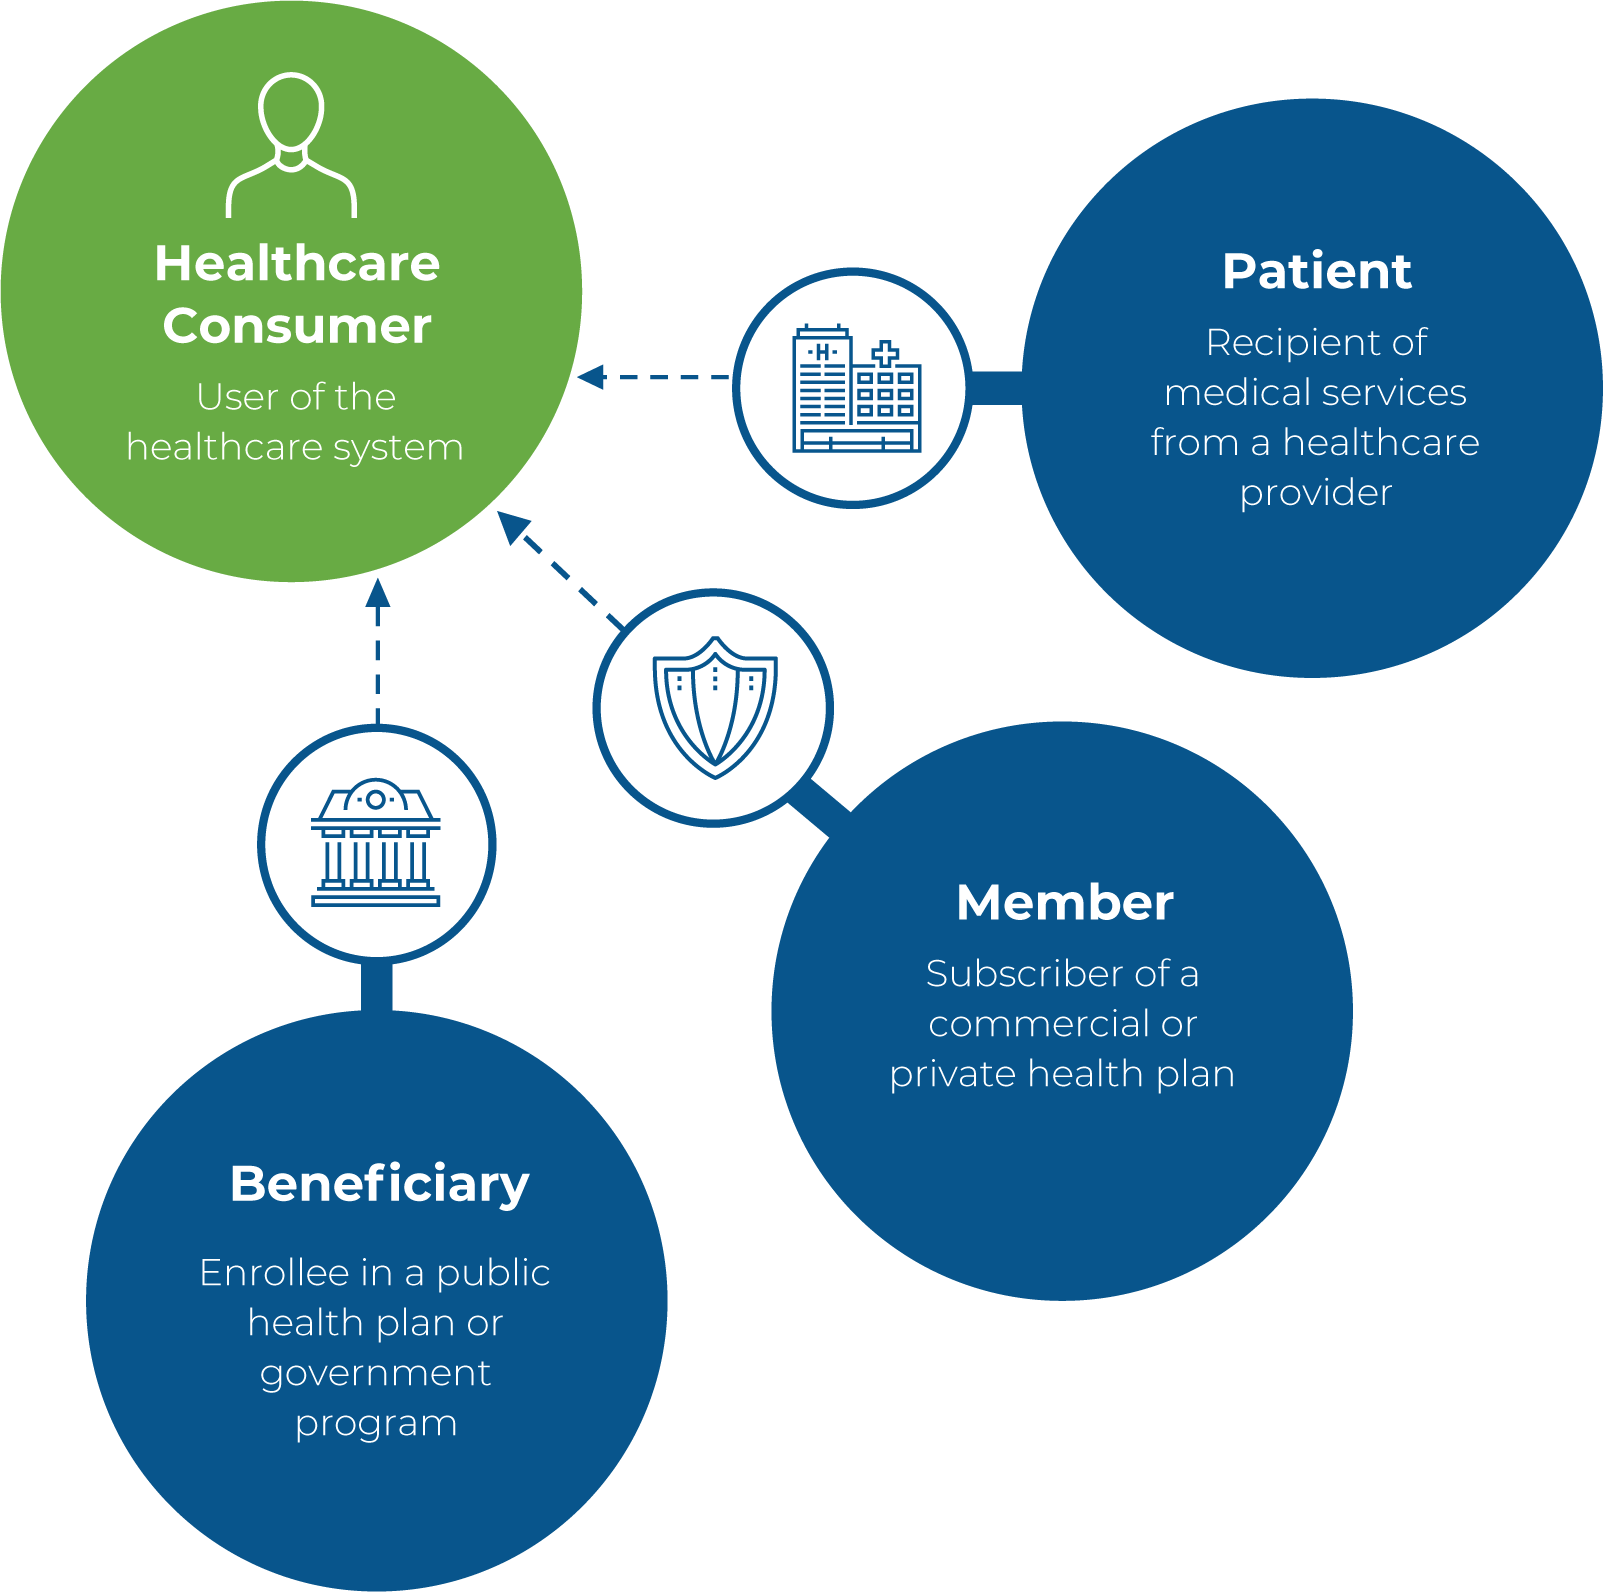 Patient: Recipient of medical services from a healthcare provider; Member: Subscriber of a commercial or private health plan; Beneficiary: Enrollee in a public health plan or government program. All connected to Healthcare Consumer: User of the healthcare system.